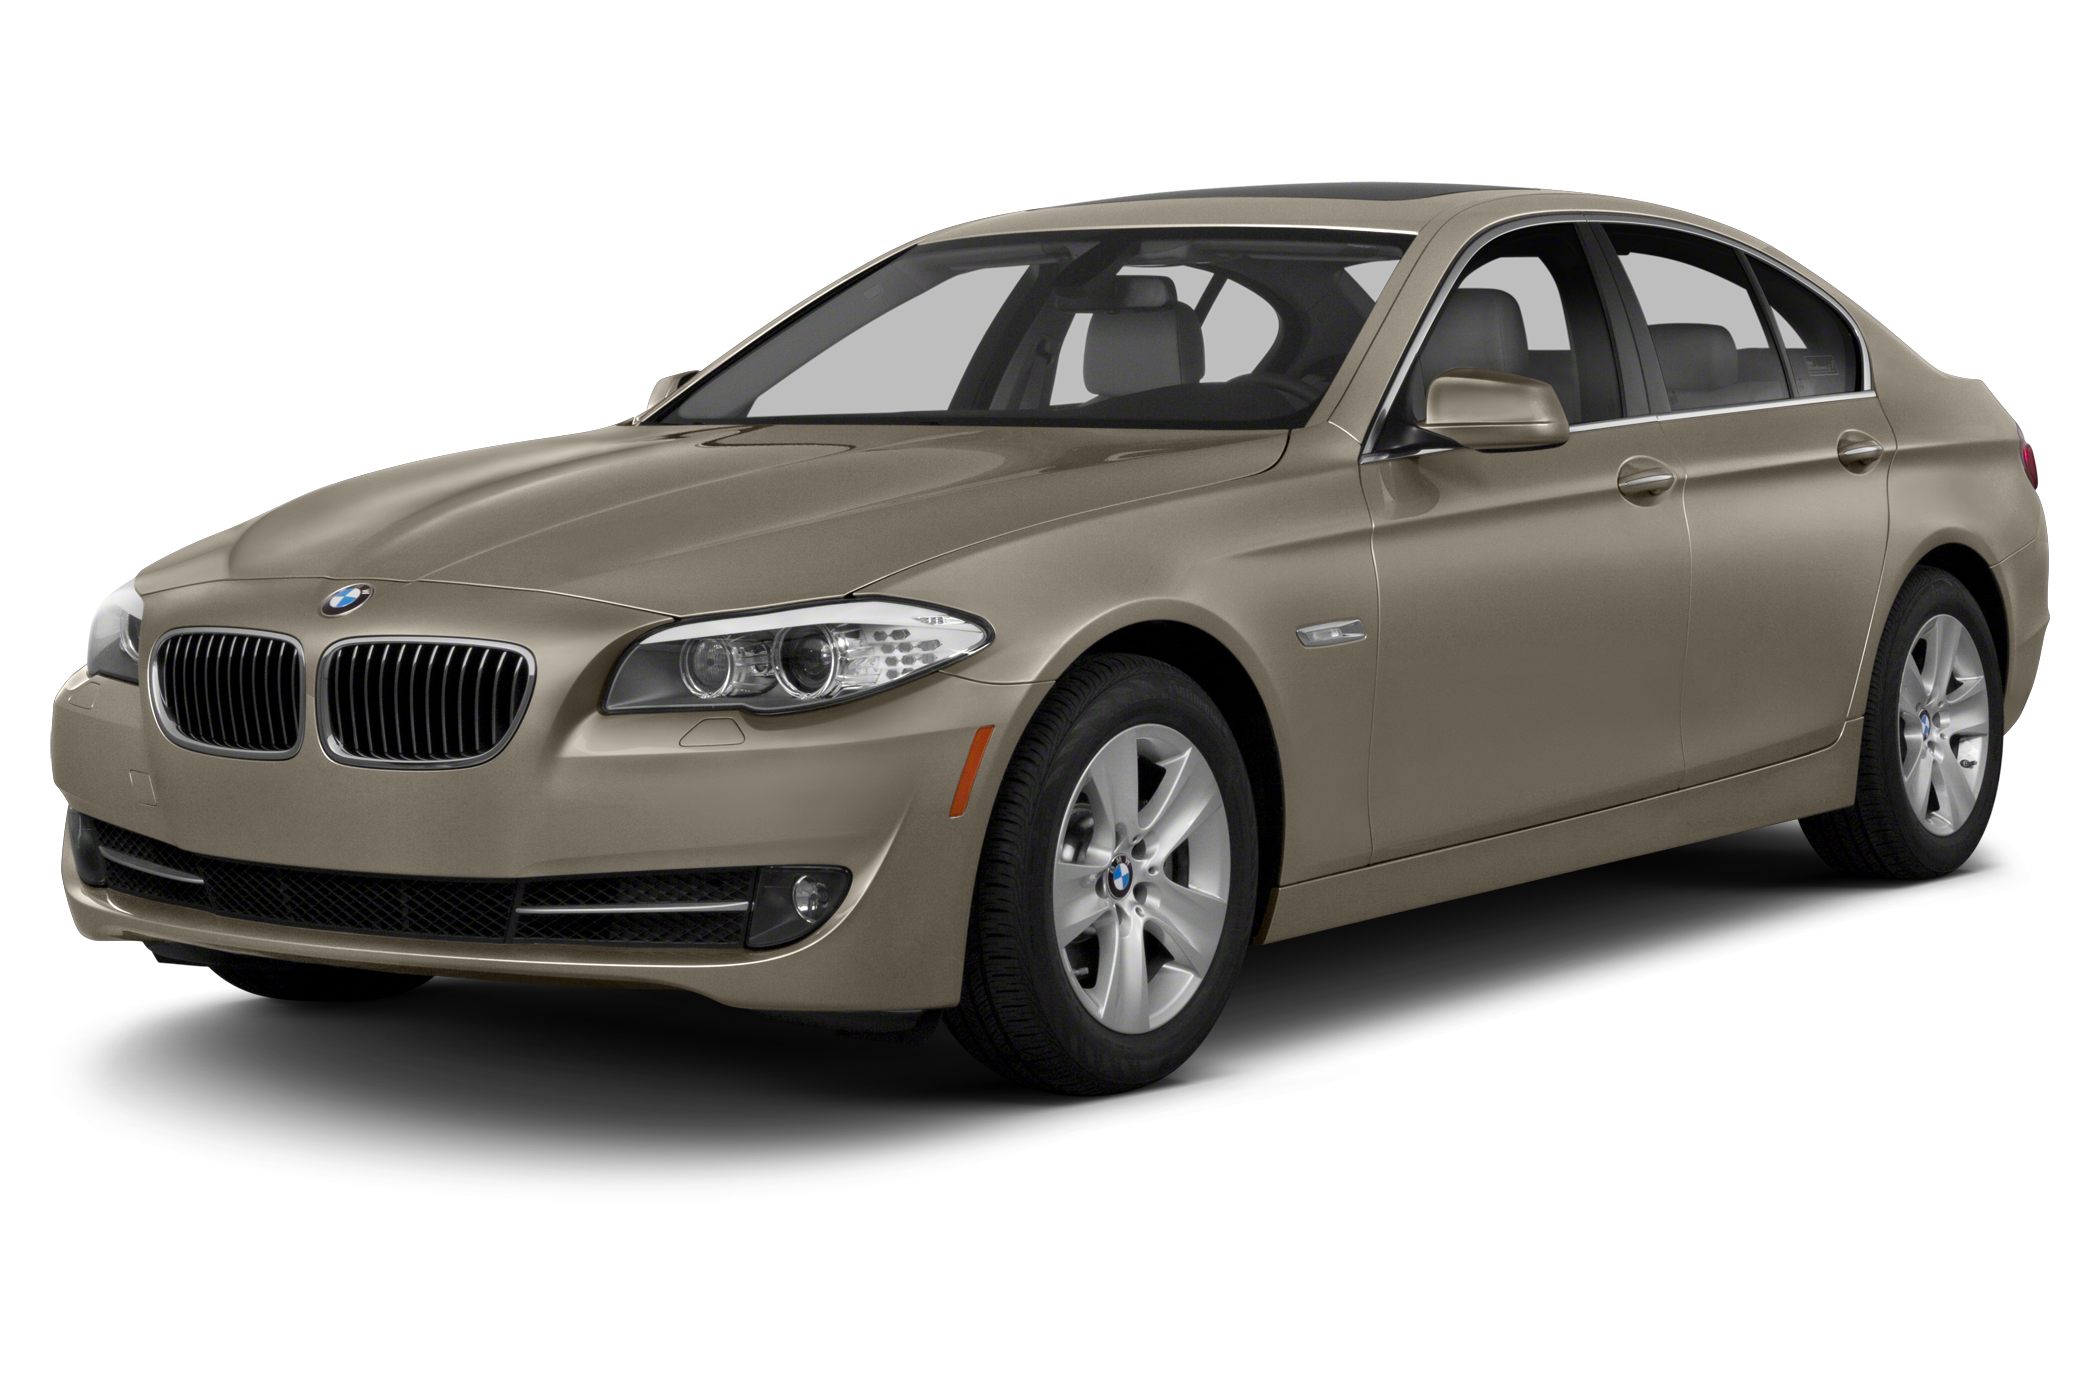 Used bmw for sale in fort worth tx #5